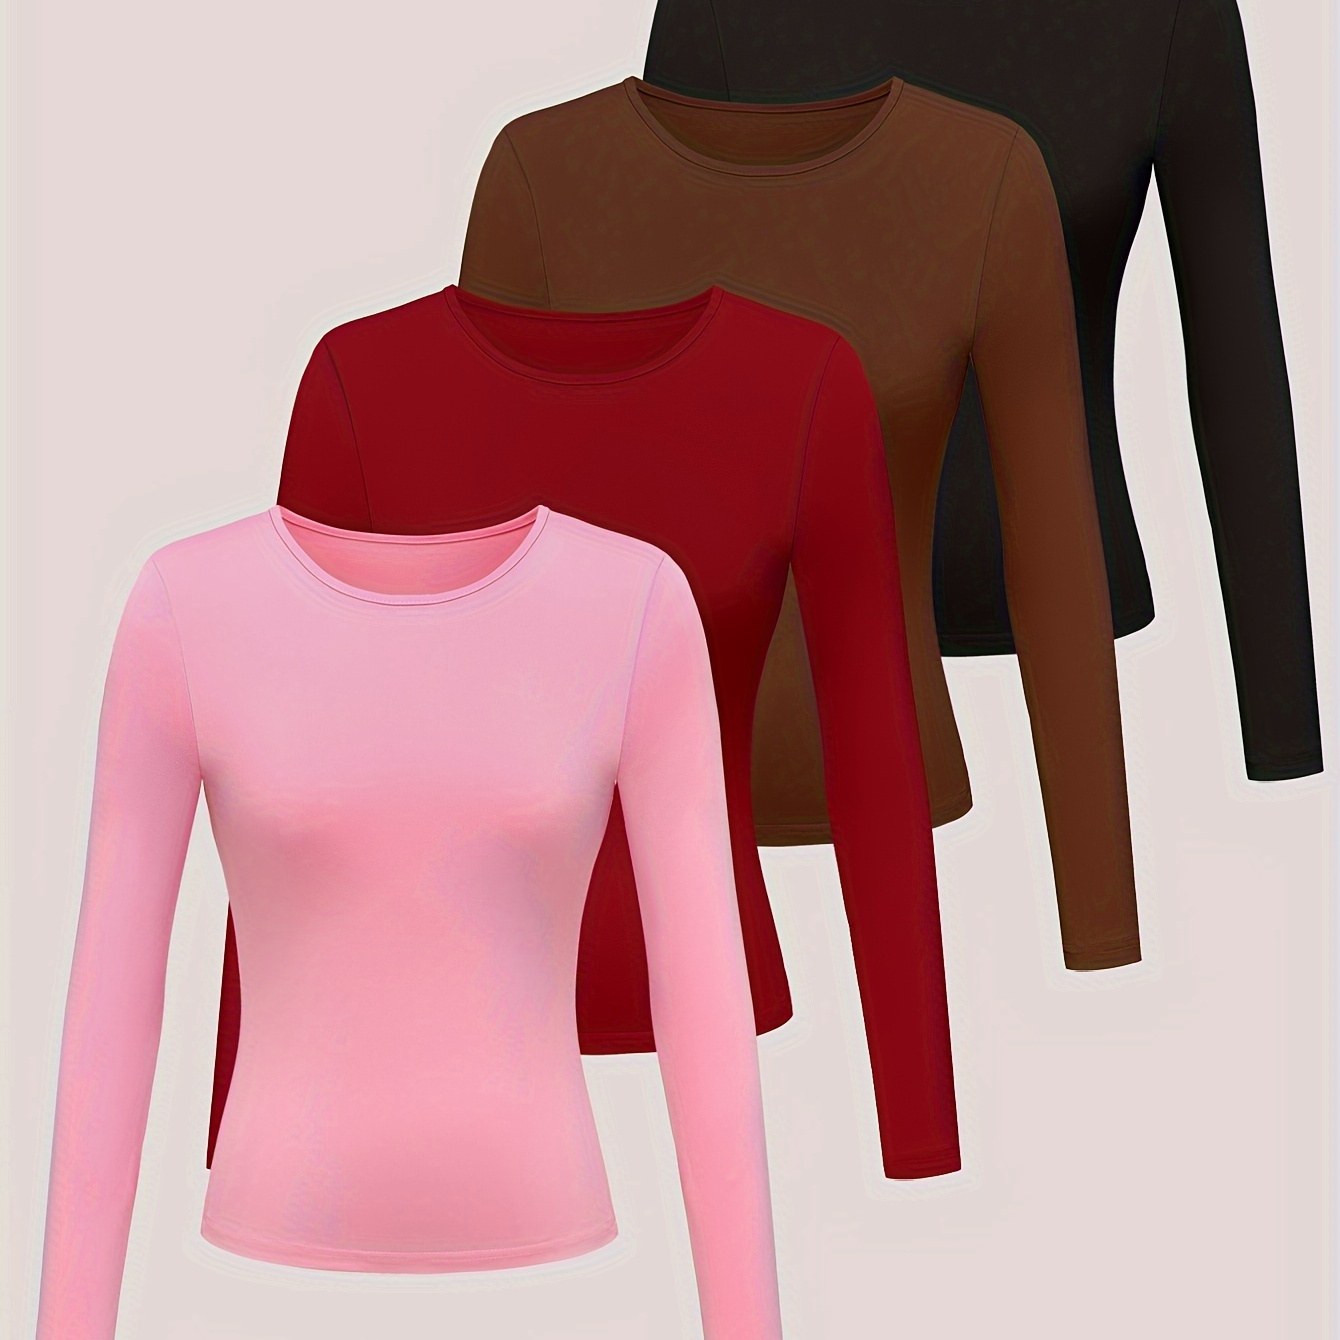 

Solid Color T-shirt 4 Packs, Versatile Long Sleeve Crew Neck Slim T-shirt For Spring & Fall, Women's Clothing